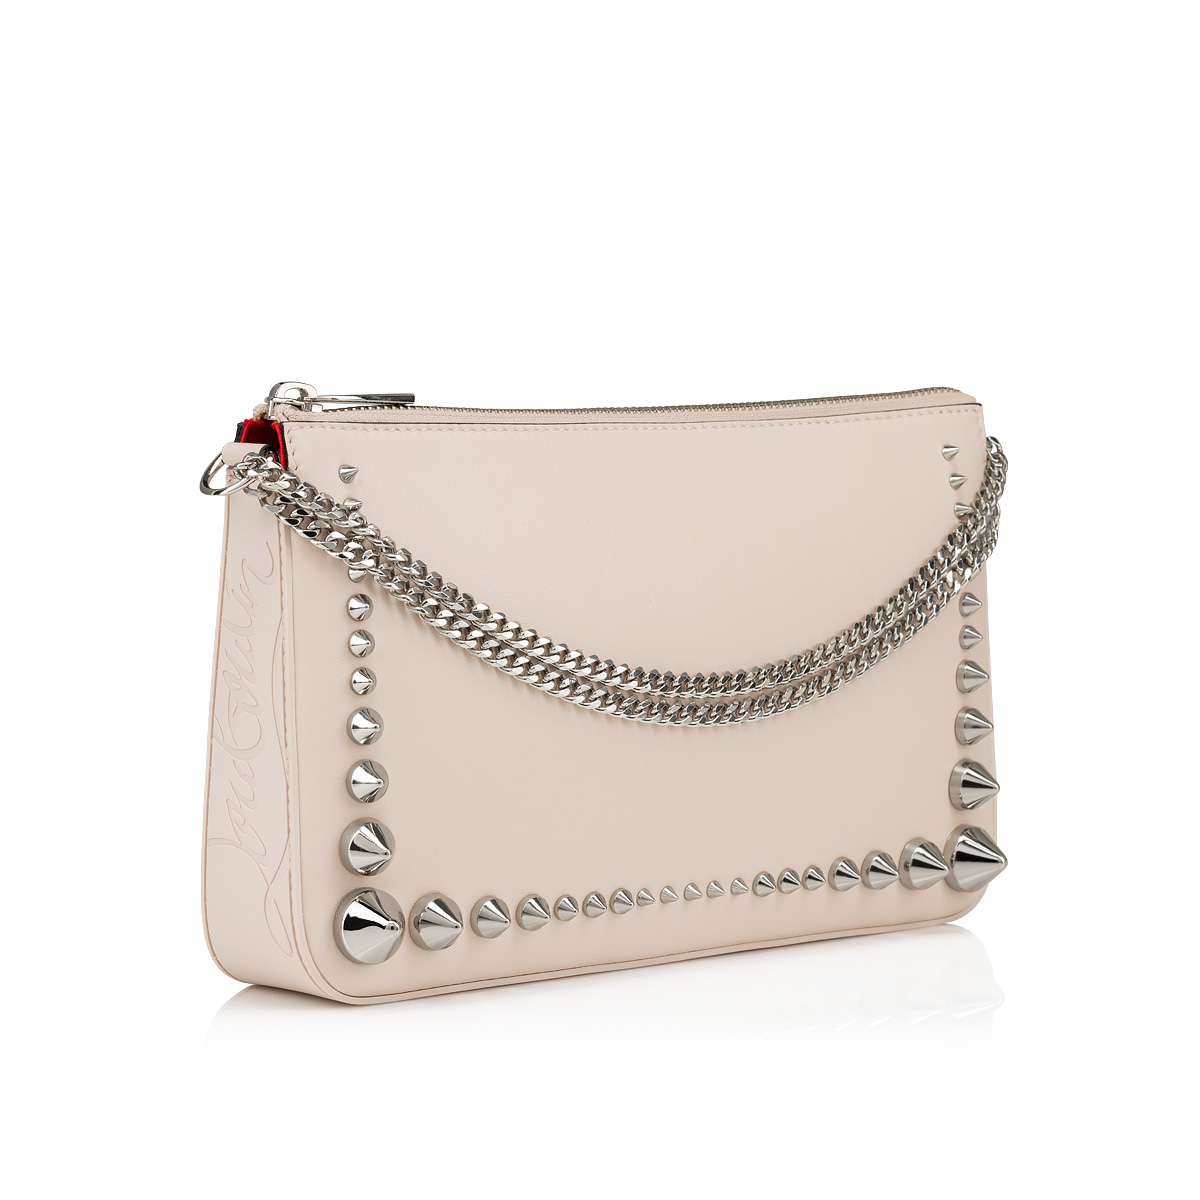 Loubila - Shoulder bag - Calf leather, rubber and spikes - Ole